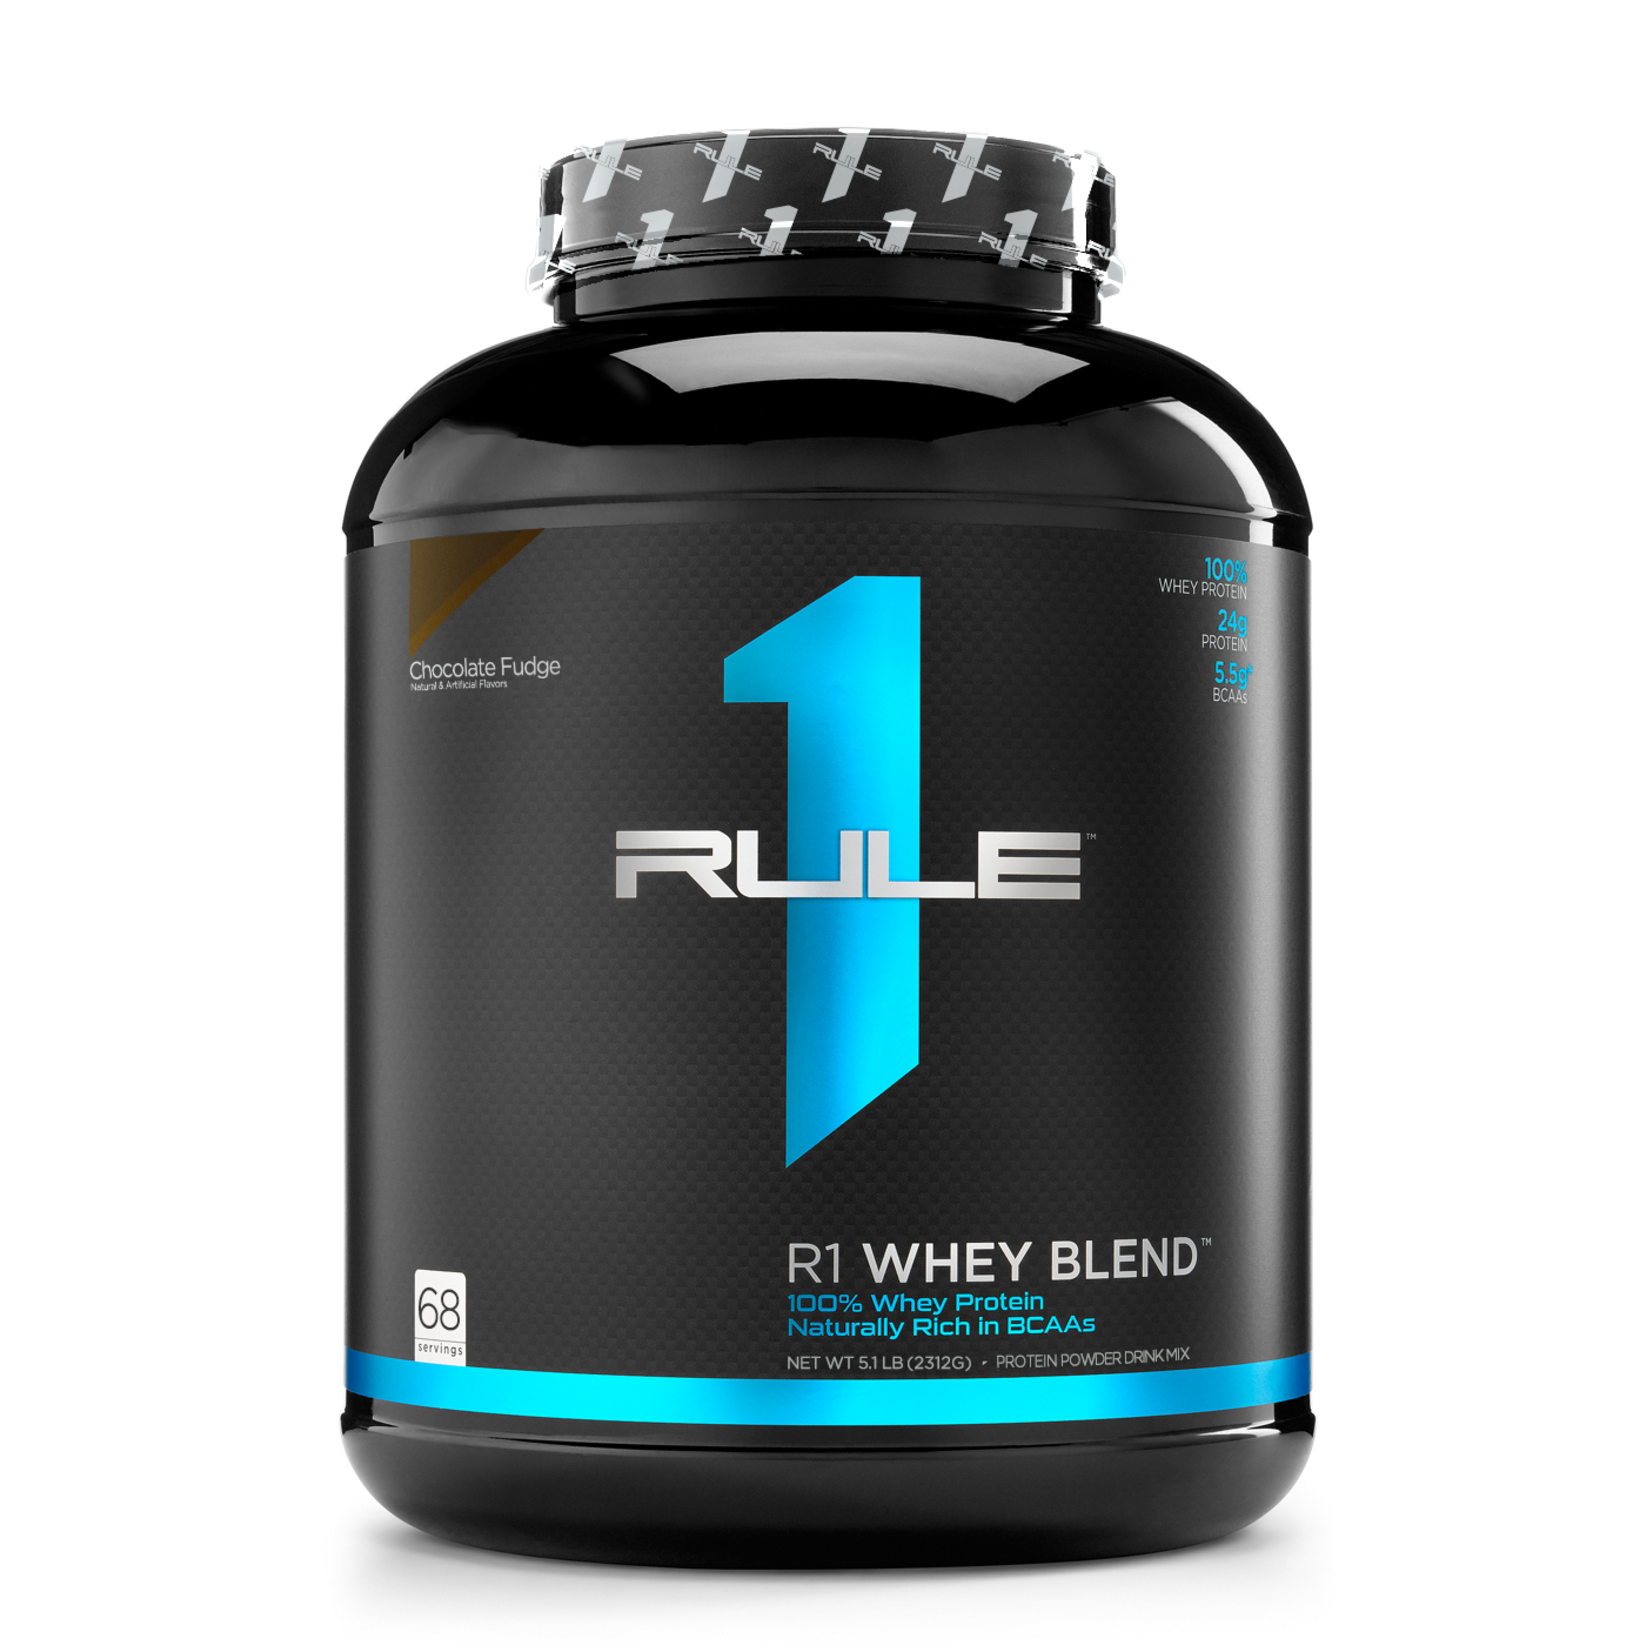 rule 1 R1 WHEY BLEND BY RULE 1 PROTEINS